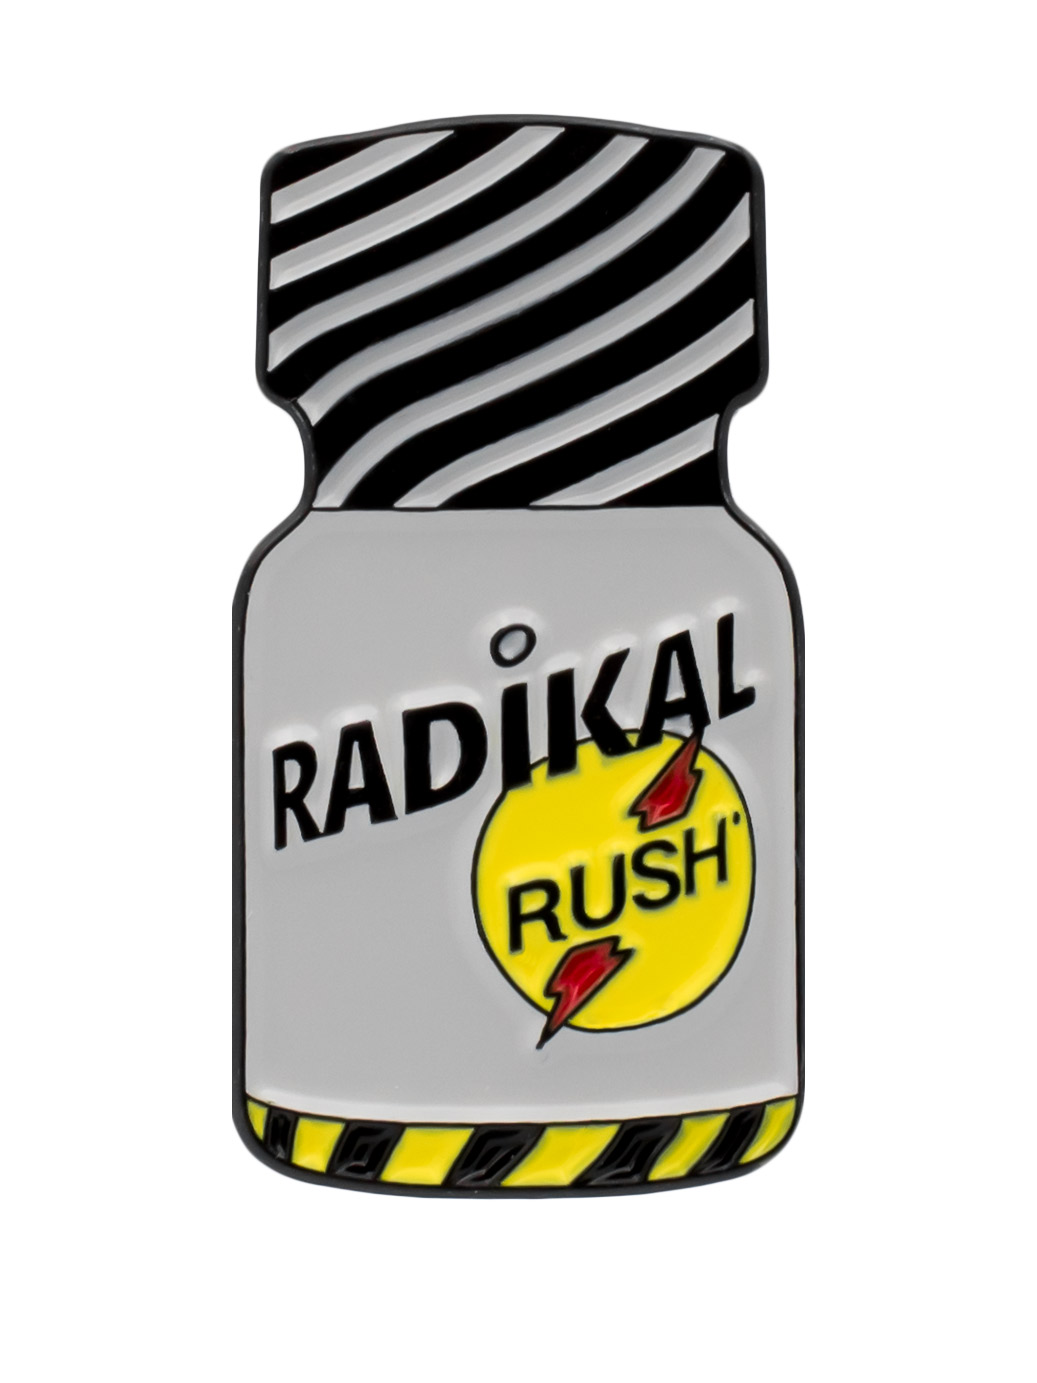 https://www.poppers-italia.com/images/product_images/popup_images/poppers-pin-radikal-rush__1.jpg